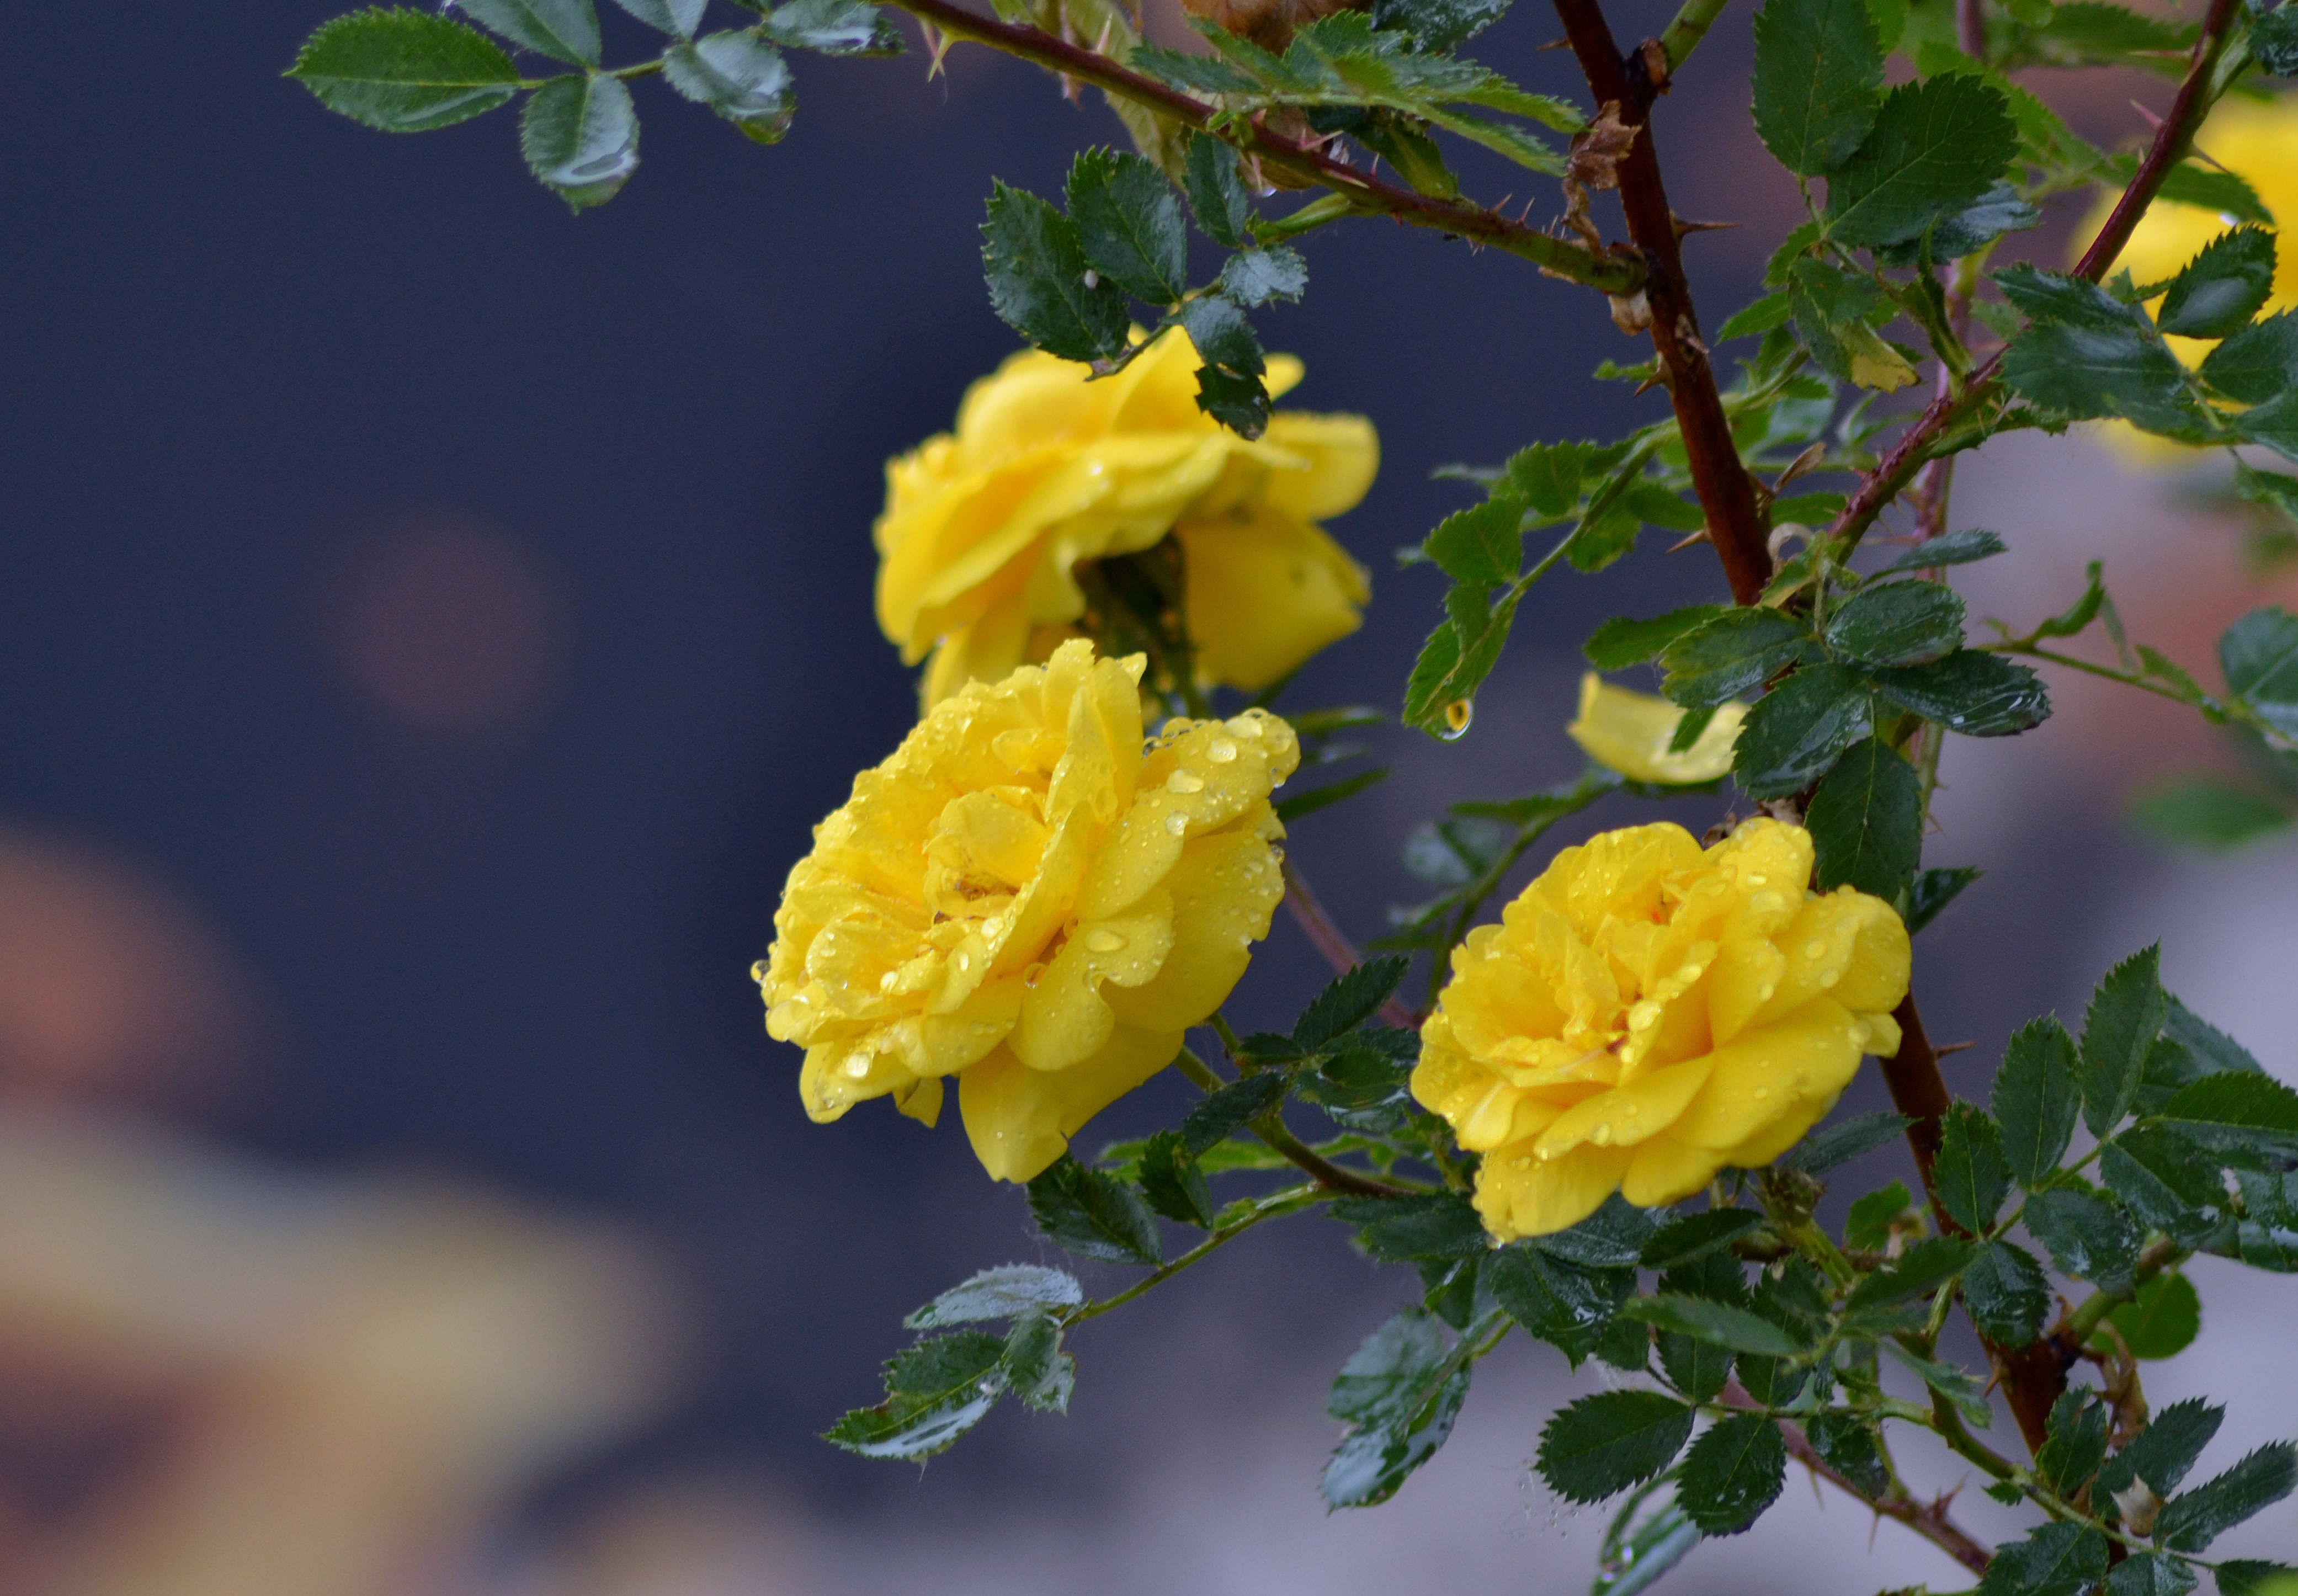 yellow roses, roses, flowers, drops, branch 32K